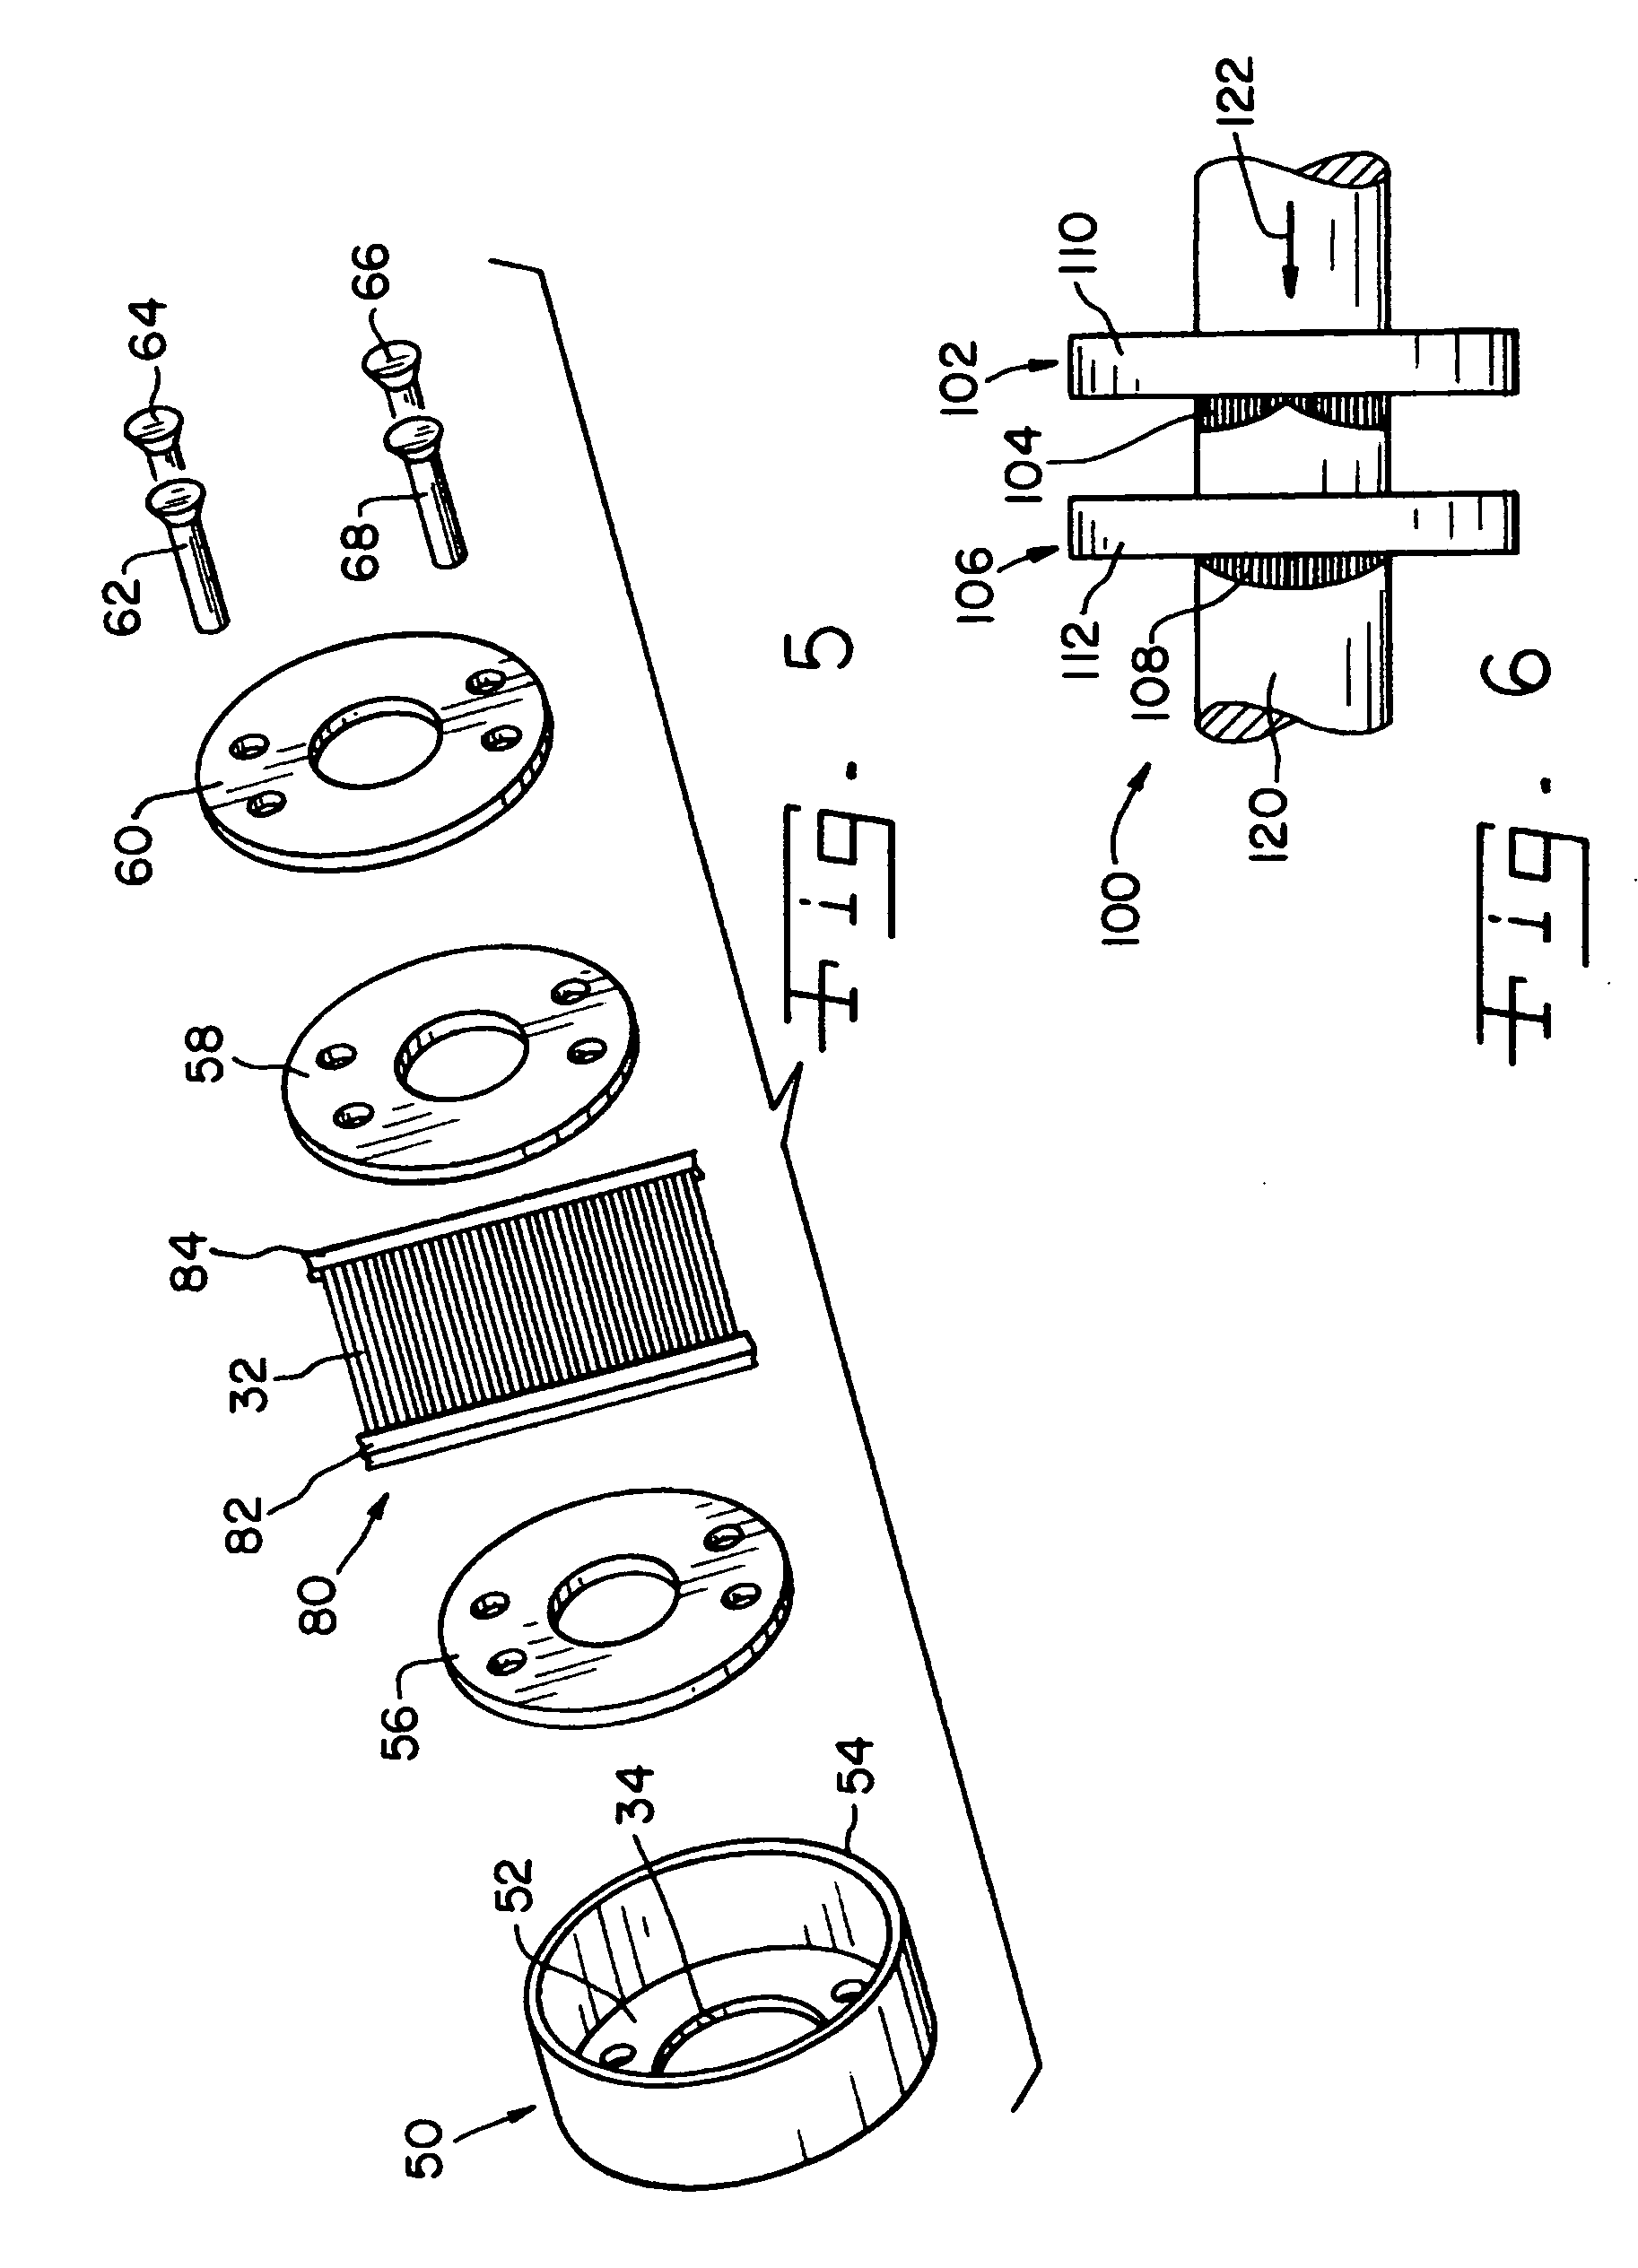 Electrical conductive contact ring for electroplating or electrodeposition